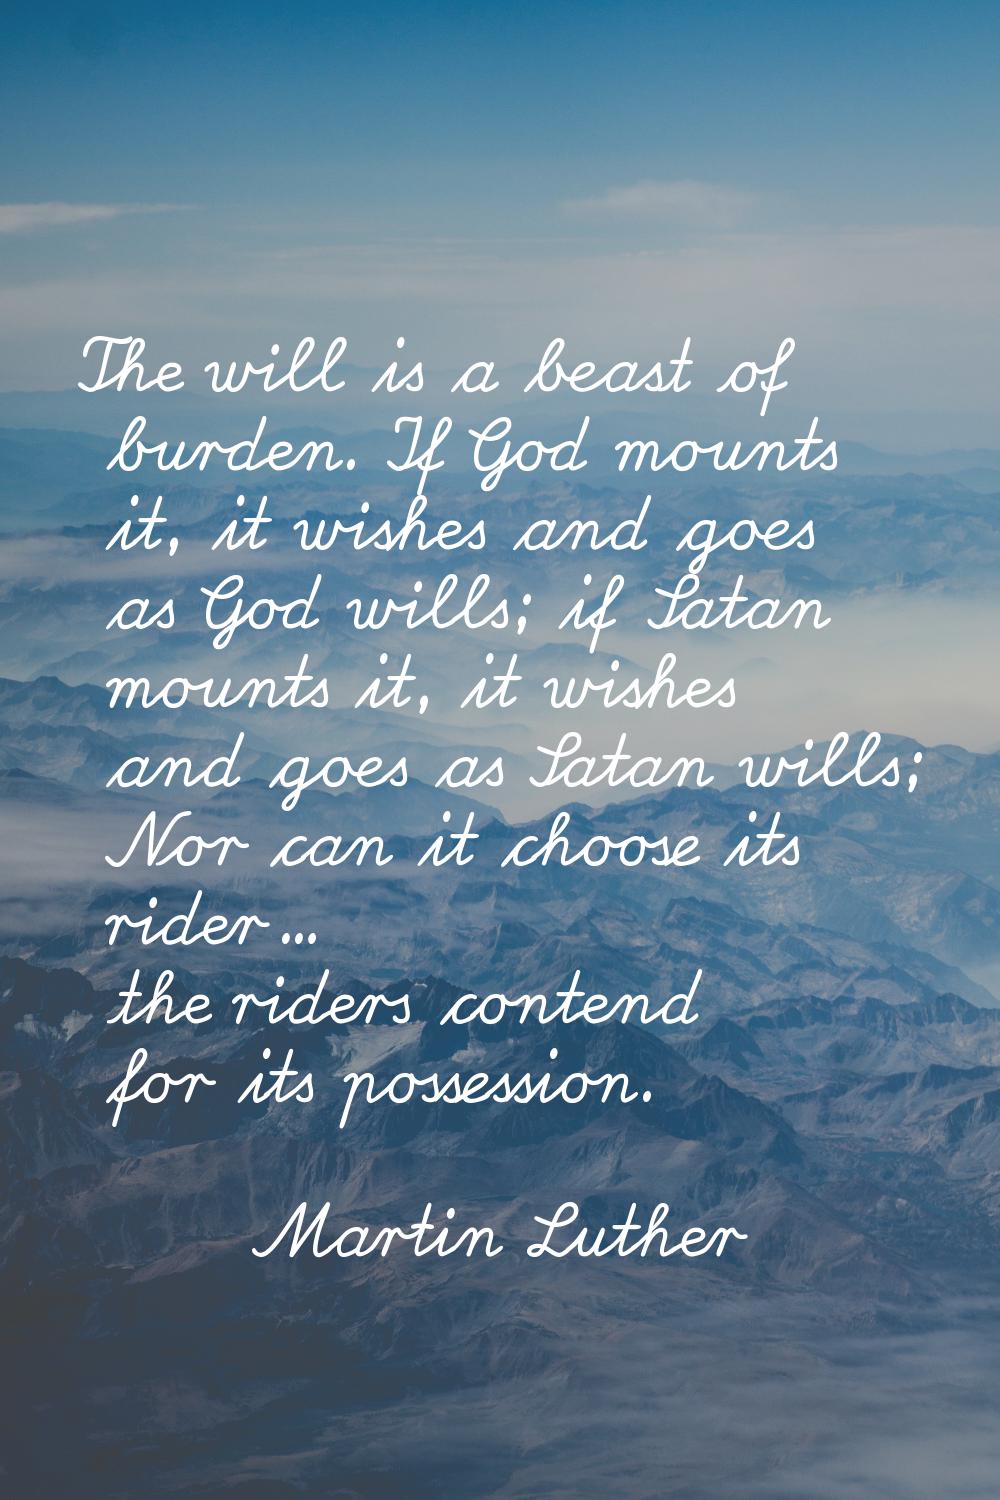 The will is a beast of burden. If God mounts it, it wishes and goes as God wills; if Satan mounts i